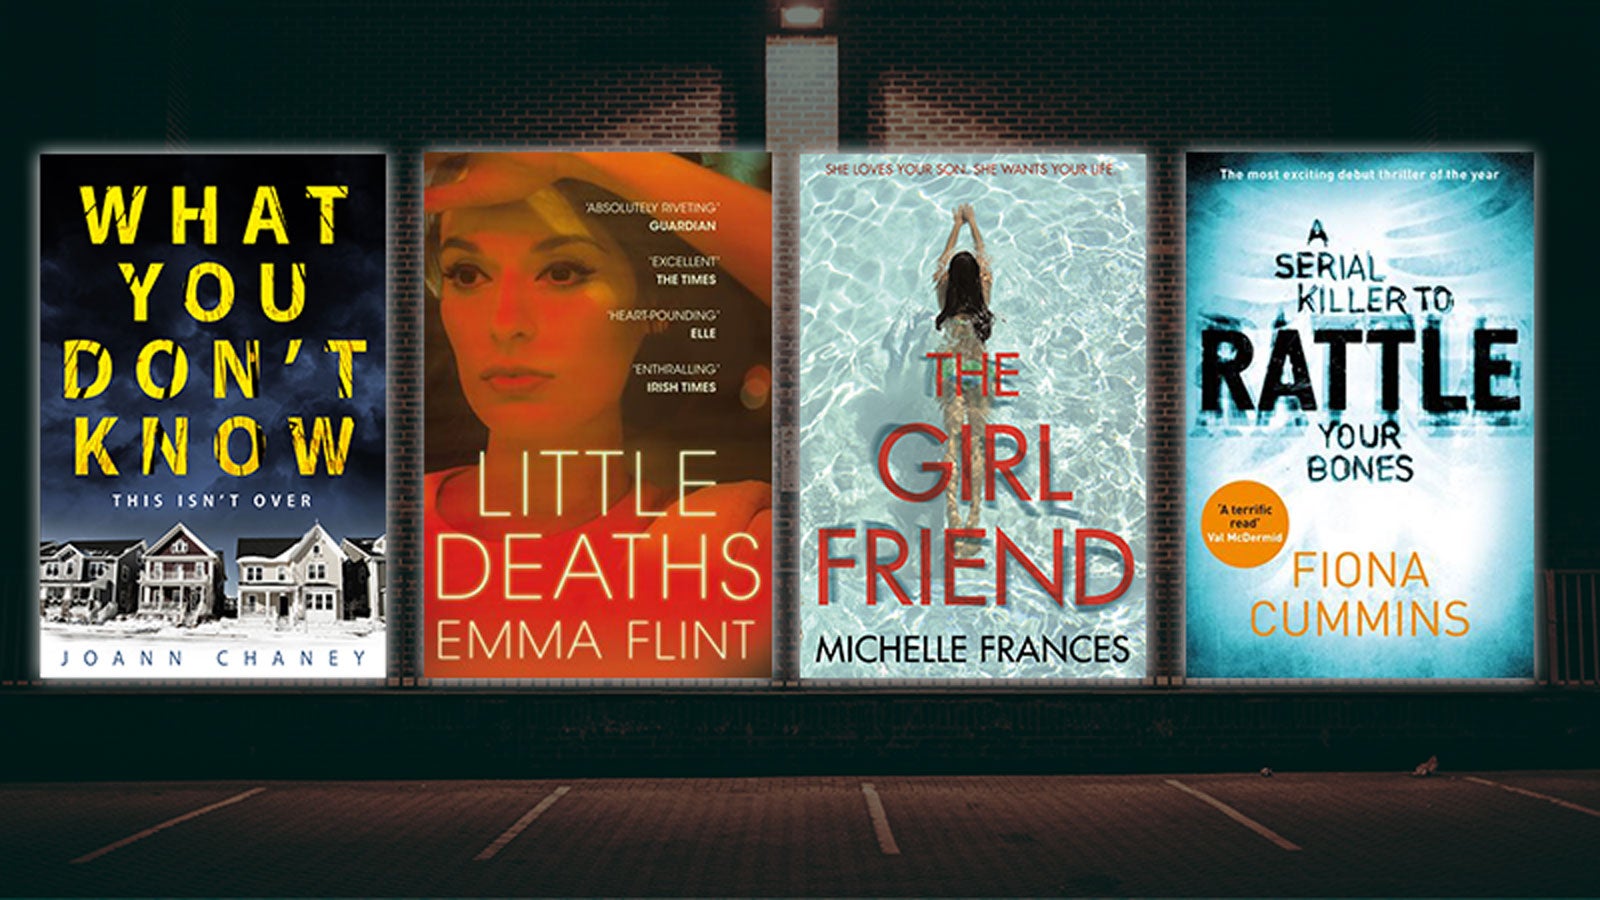 Book covers for What You Don't Know, Little deaths The Girl Friend and Rattle